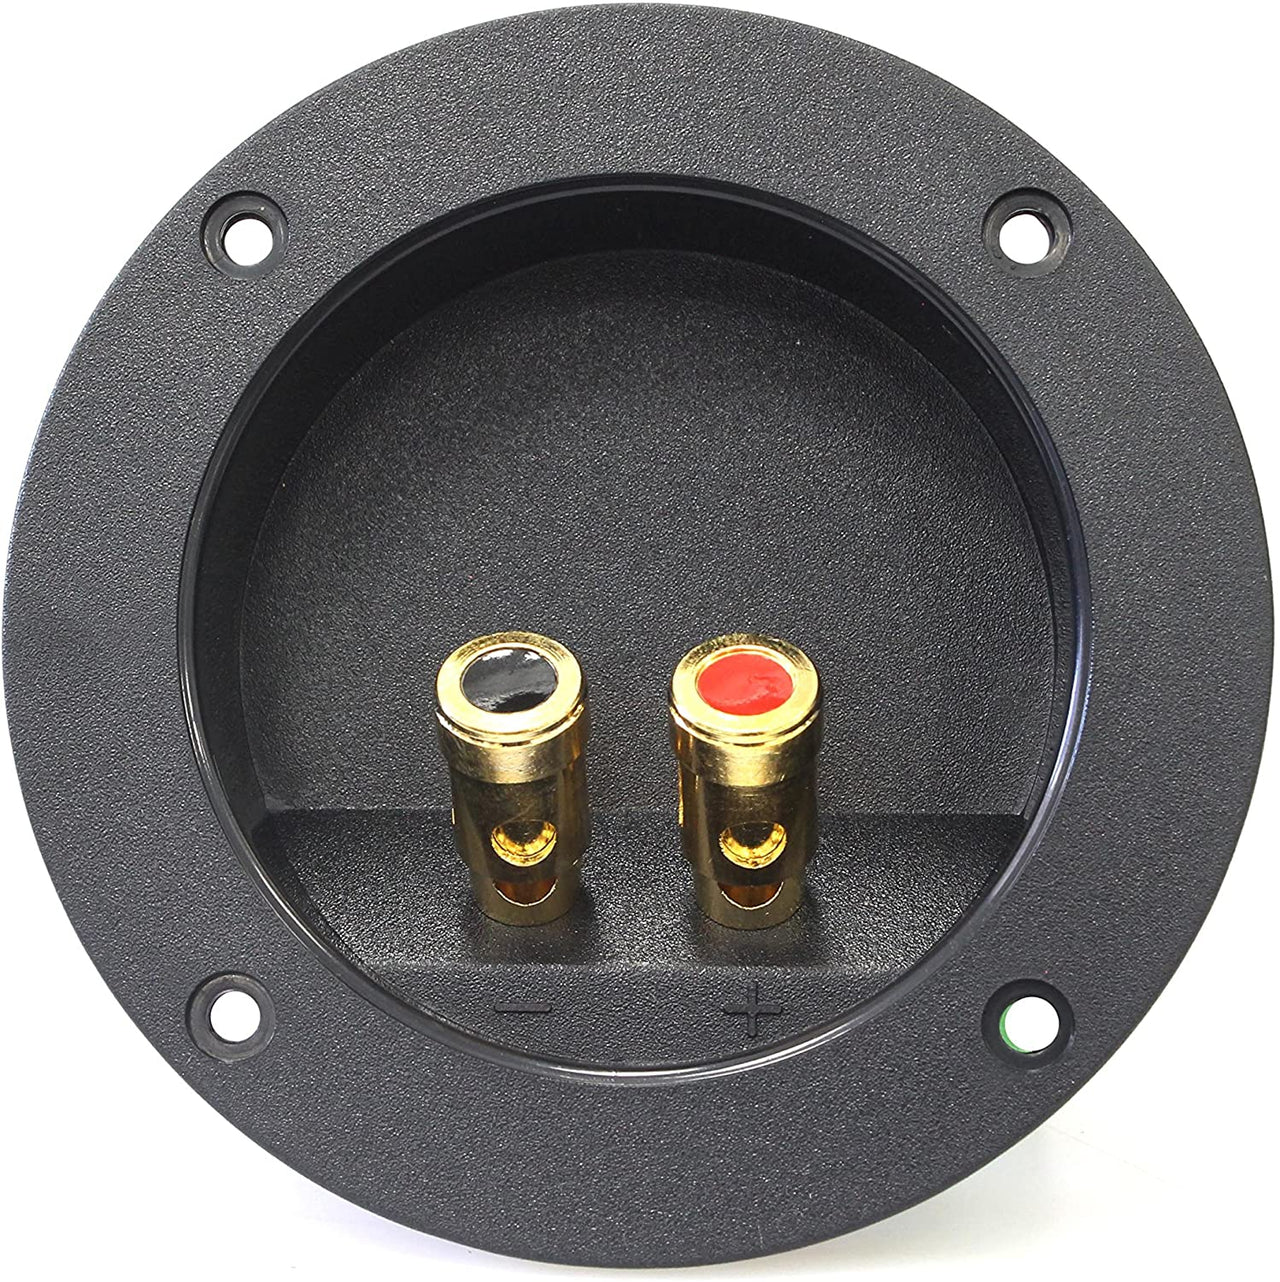 Absolute USA RST-450 4-Inch Round Gold Push Spring Loaded Jacks Double Binding Post Speaker Box Terminal Cup